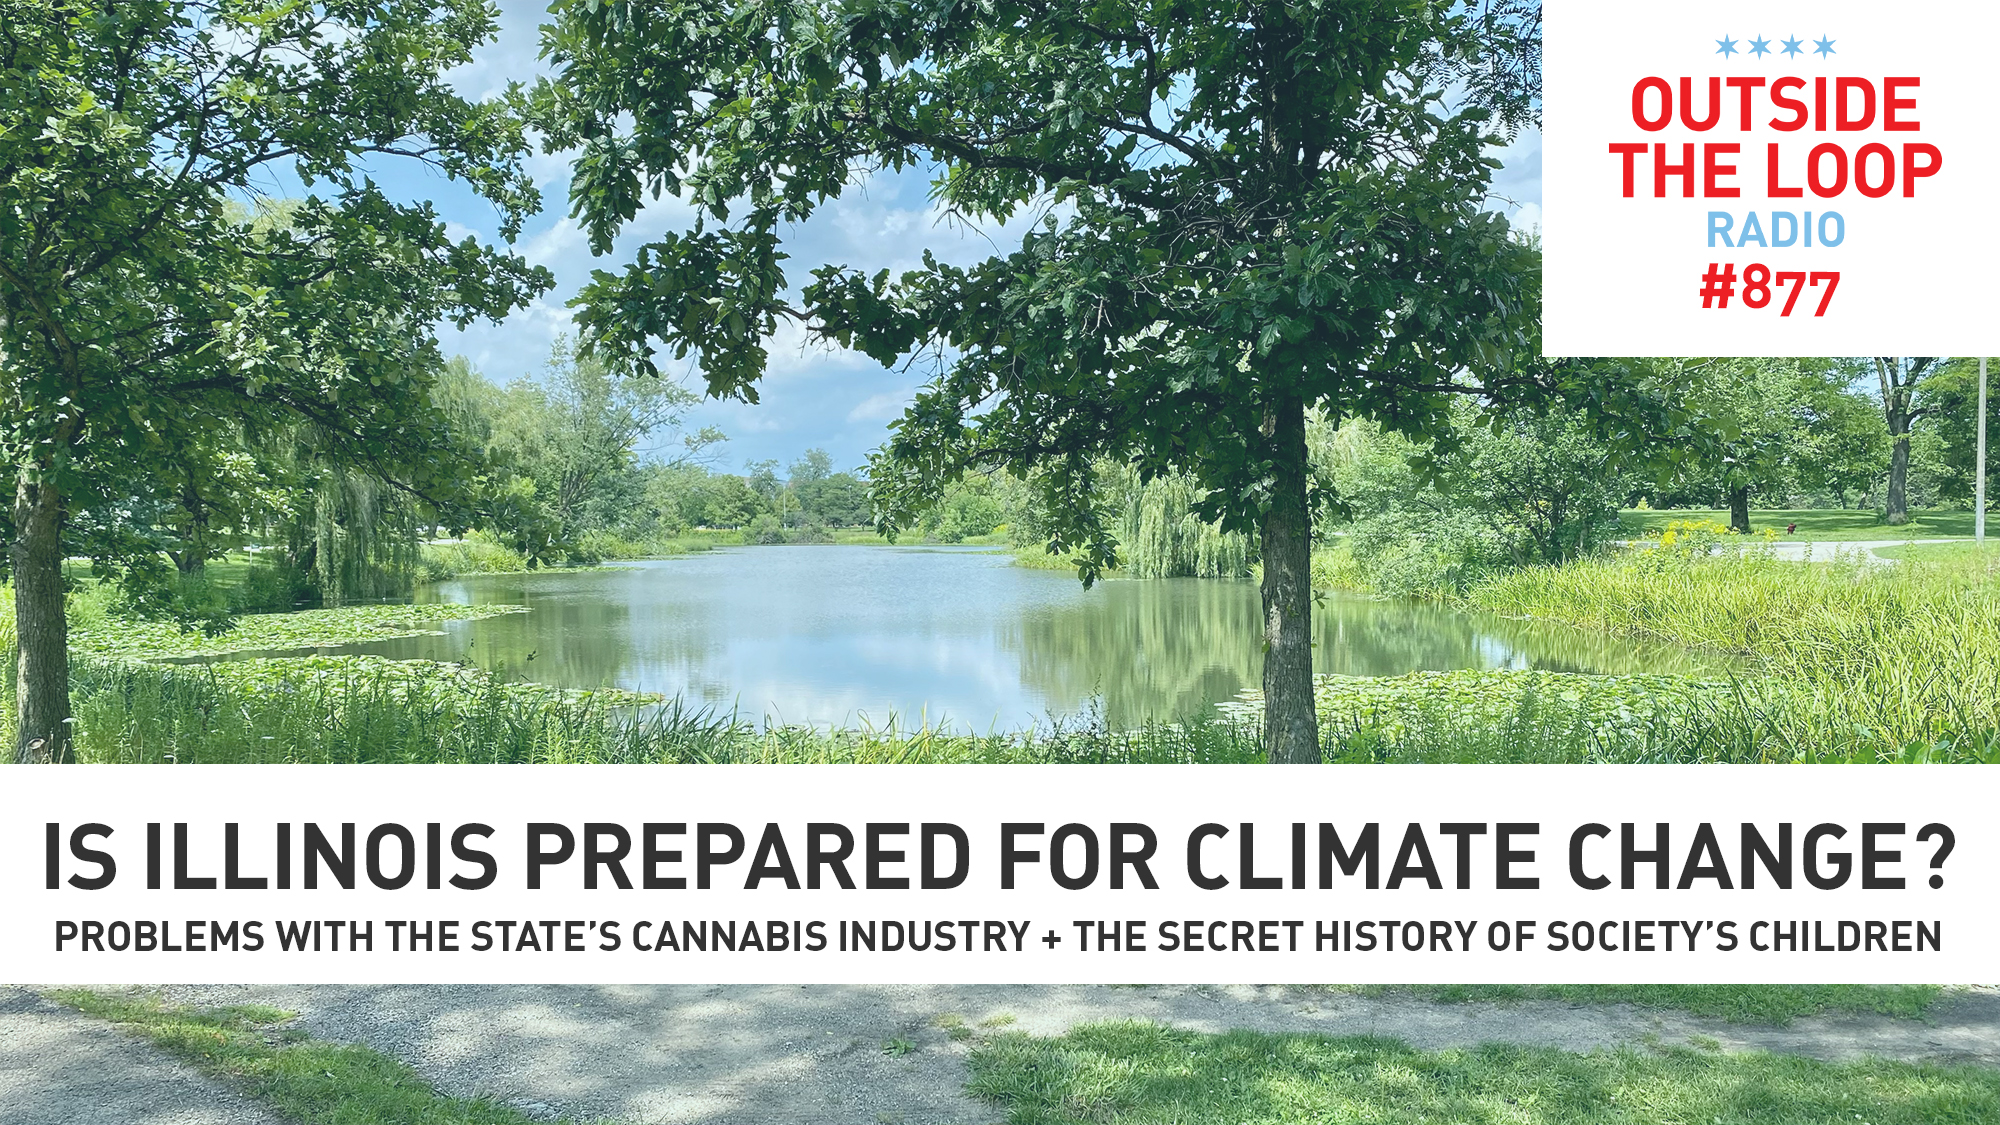 Is Illinois prepared for climate change? (Photo credit: Mike Stephen/WGN Radio)